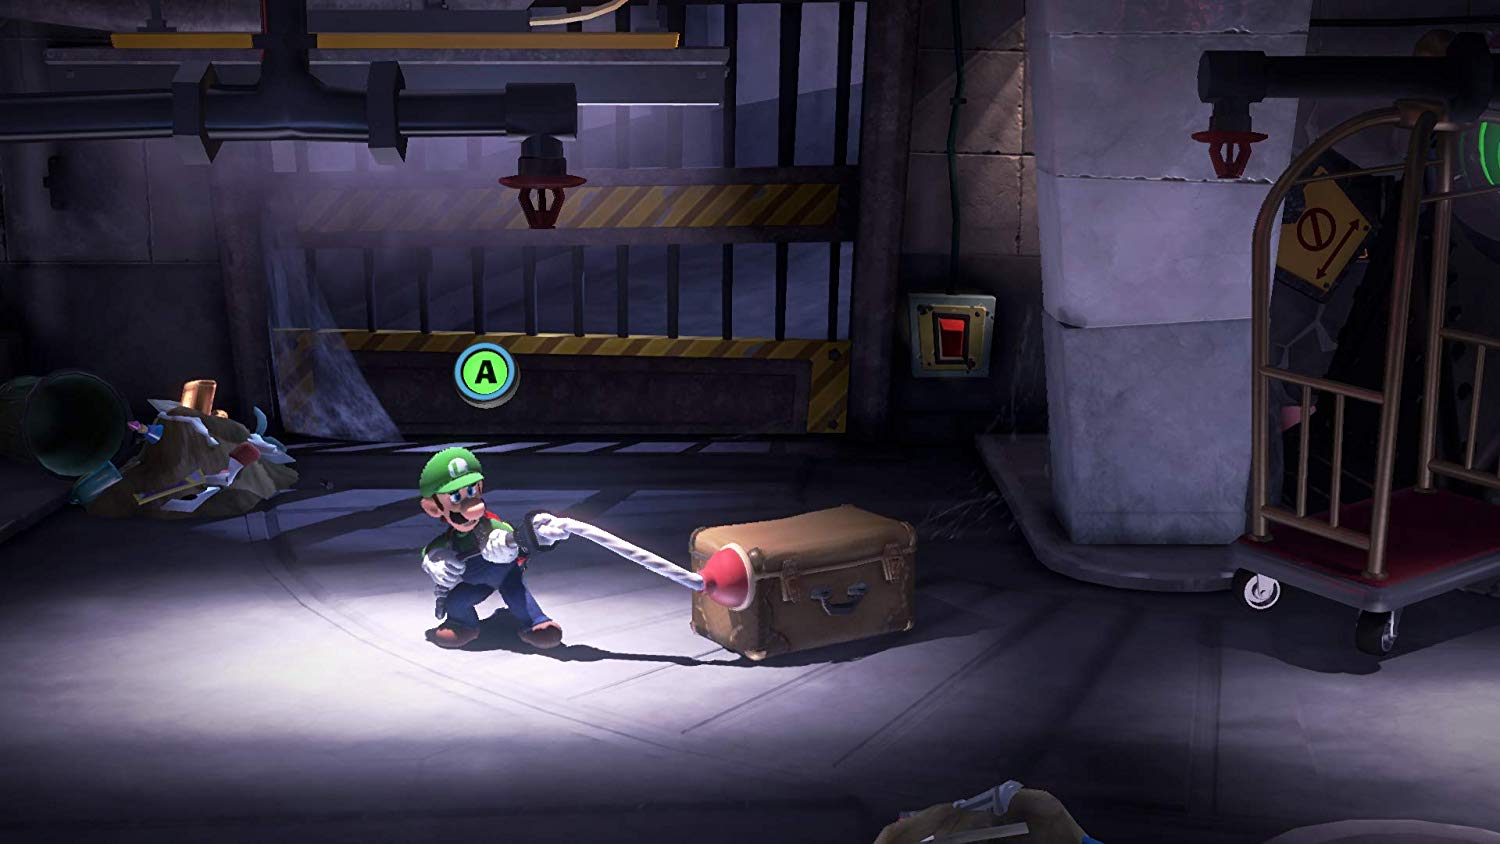 Luigi's Mansion 3 using the Poltergust G-00 Suction Shot on a box